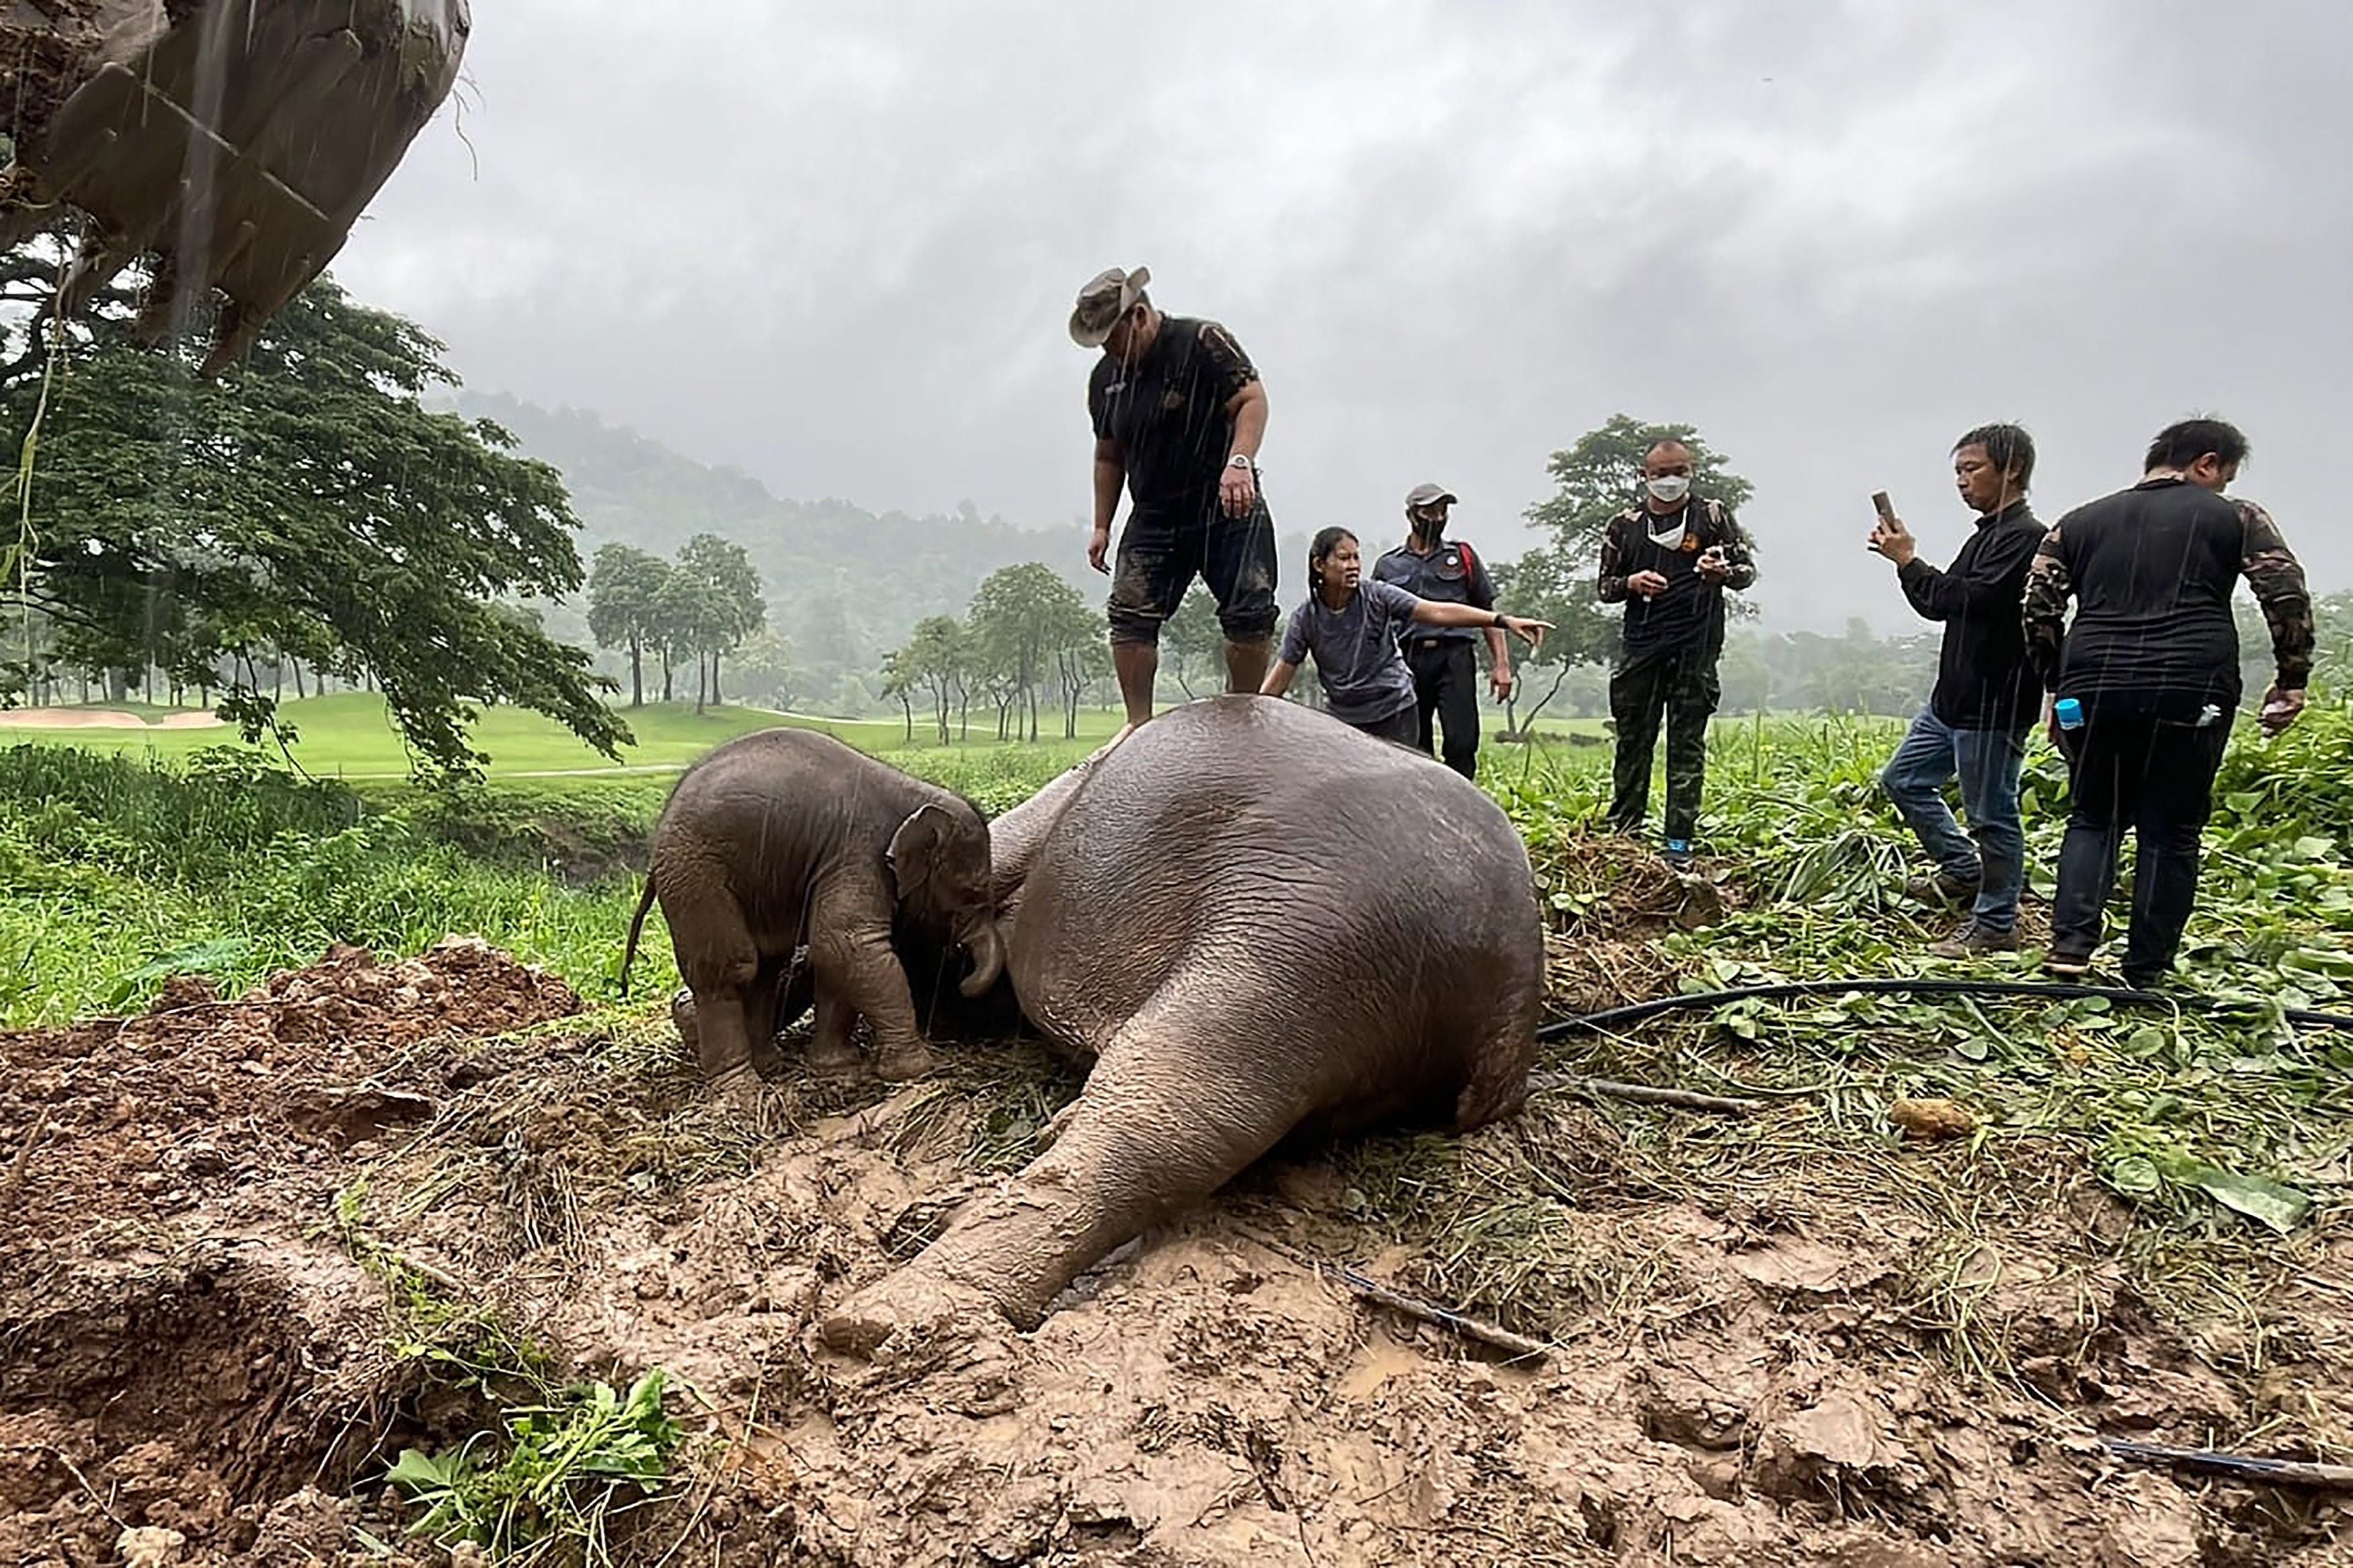 A calf stands next to its mother, a sedated adult elephant, following a rescue operation to recover the younger elephant after it fell into a hole, in Nakhon Nayok province in central Thailand